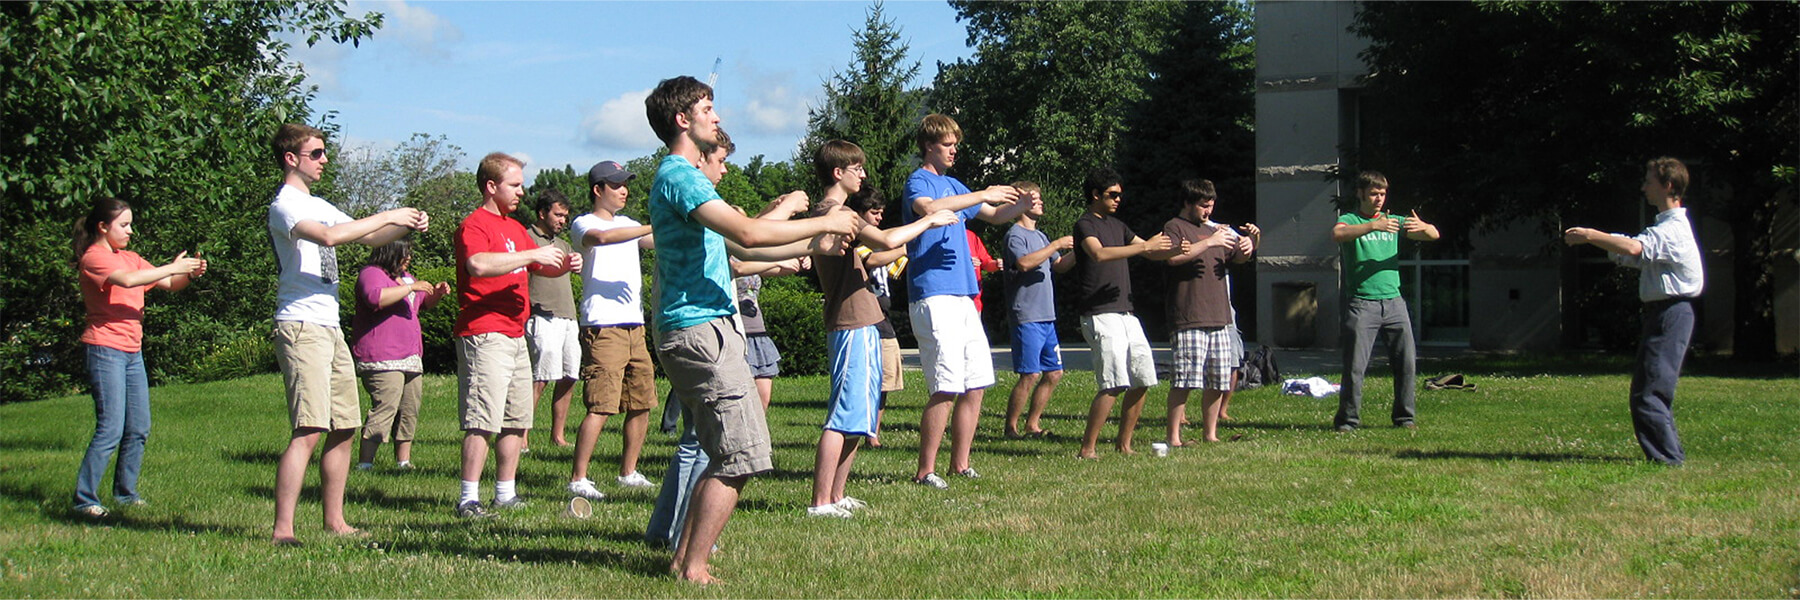 Students are involved in an activity outside.